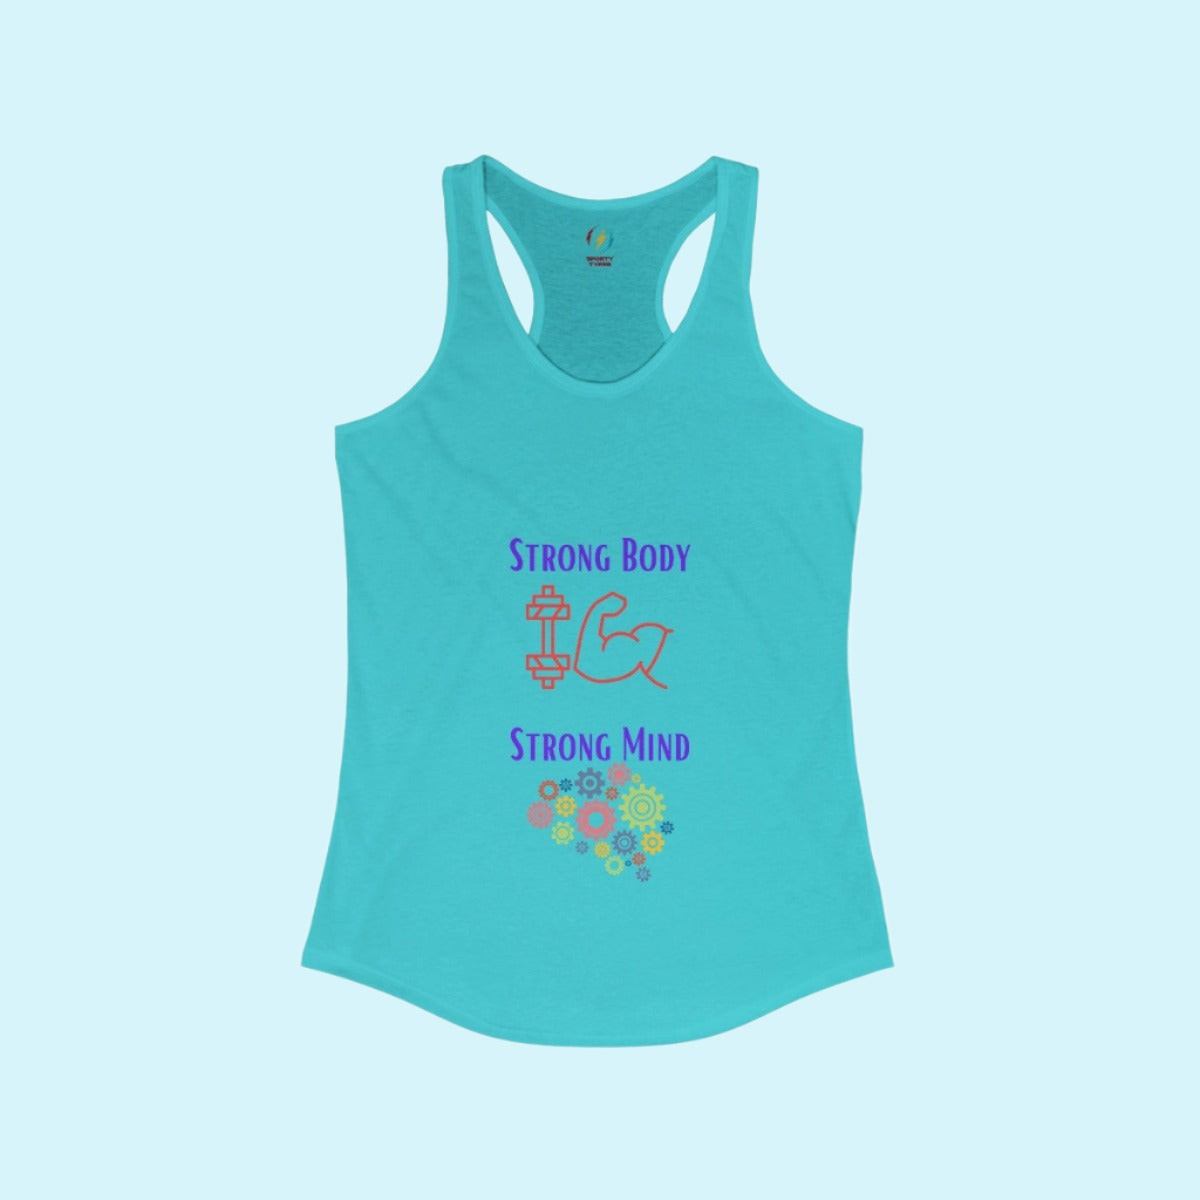 Tahiti Blue Women's Strong Body Strong Mind Performance Racerback Tank Top